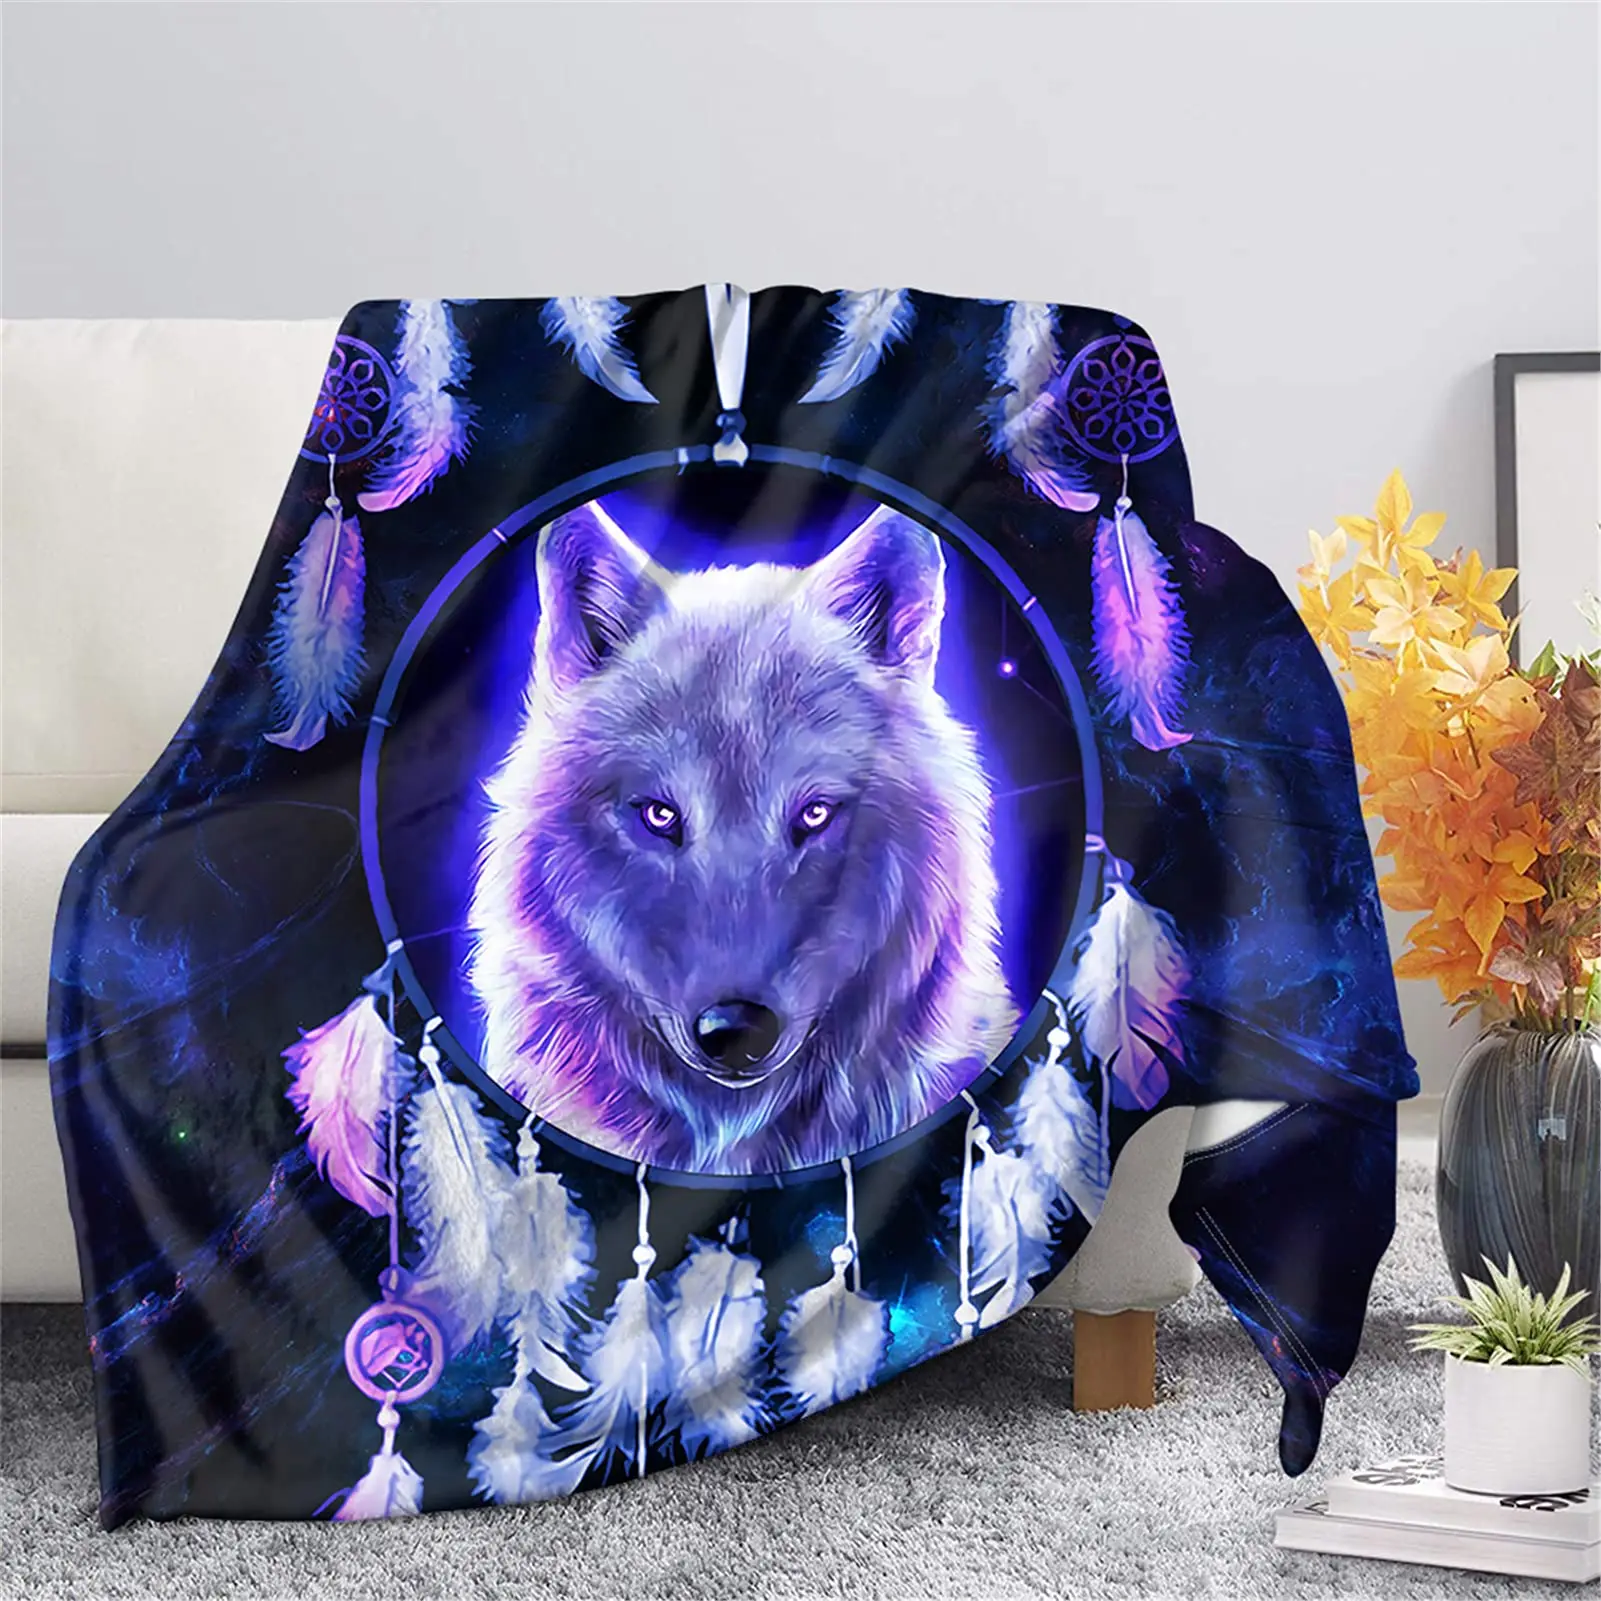 

Blue Wolf Fleece Throw Blanket Winter Wolves Animal Comfy Blanket Lightweight Soft Thick Warm Blanket for Bed Couch Twin Queen